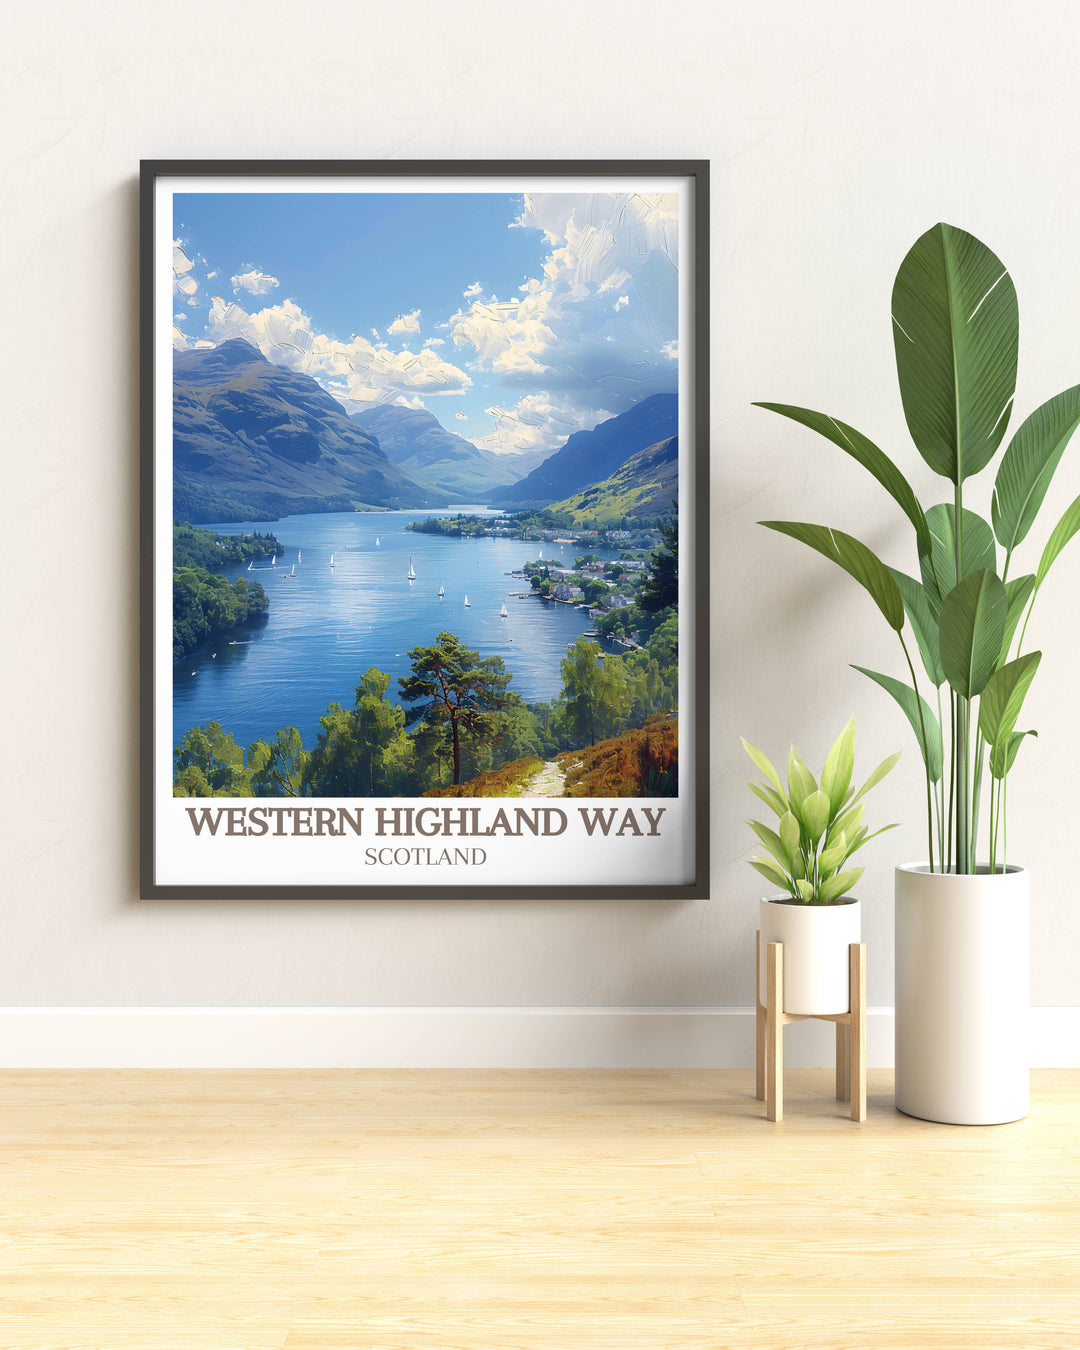 Vibrant and intricate art of Loch Lomond, bringing the natural beauty of Scotlands Highlands into your living space with a modern print.